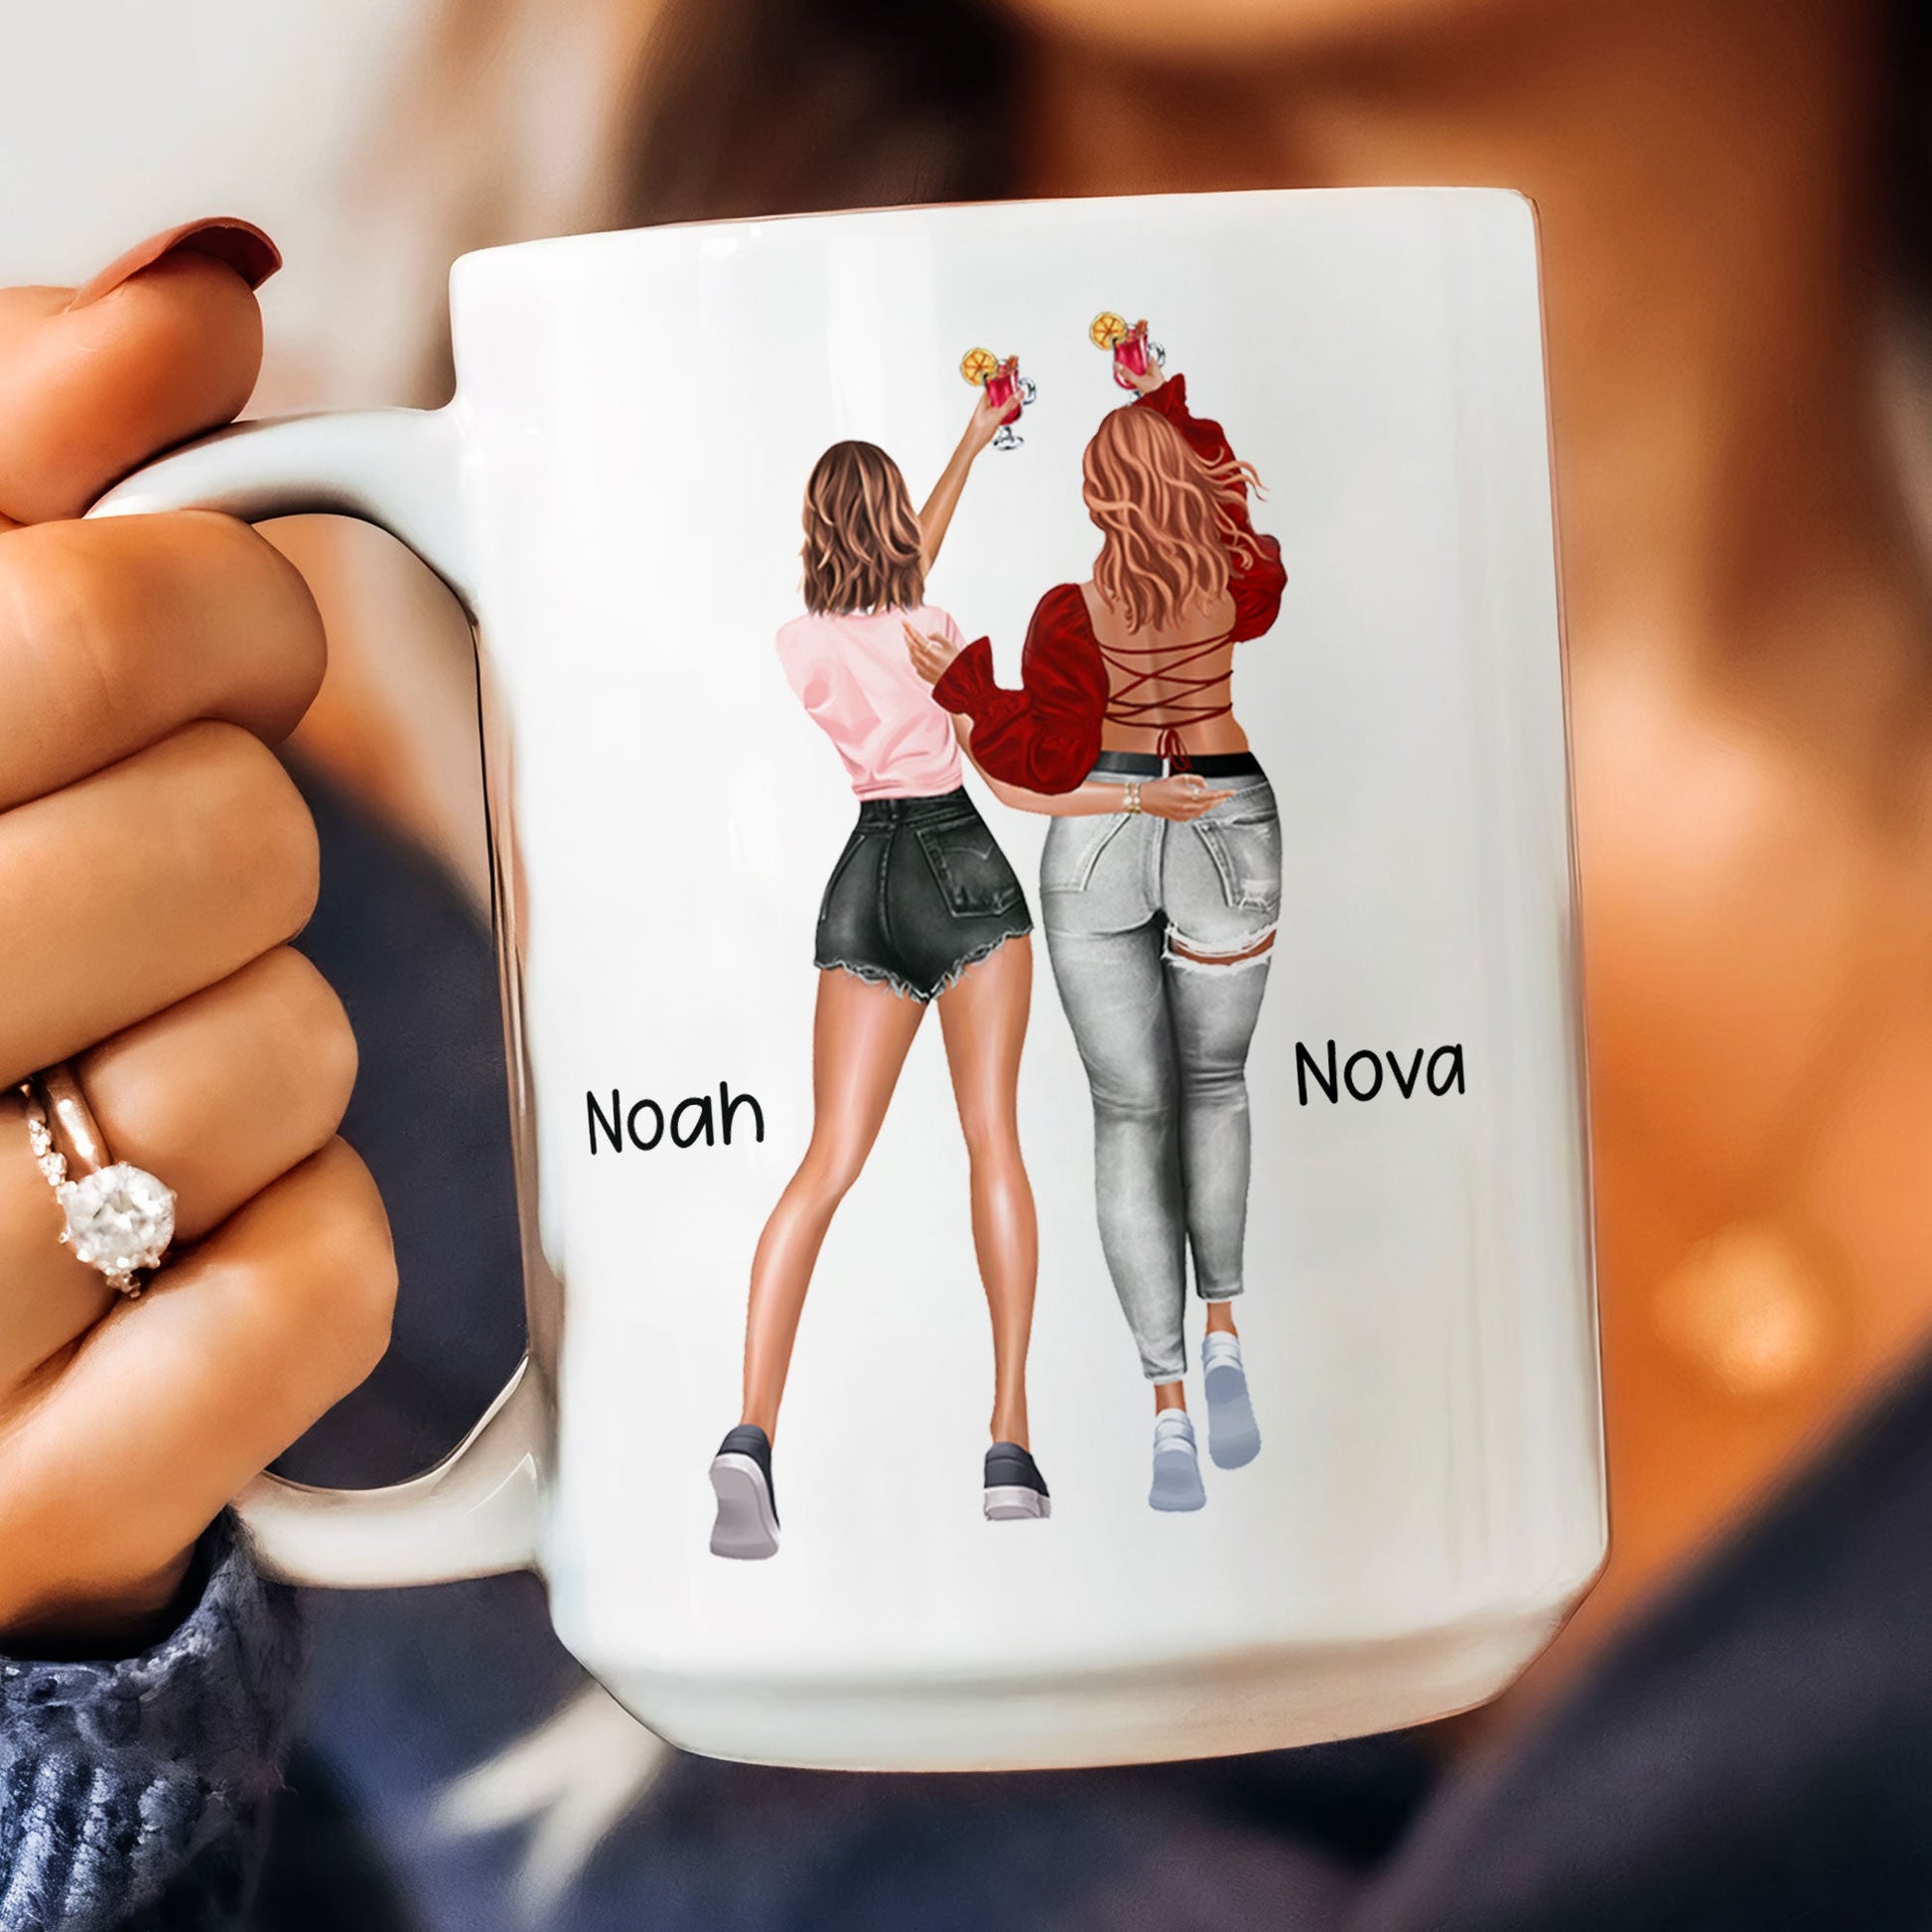 You And I Are Sisters - Personalized Mug